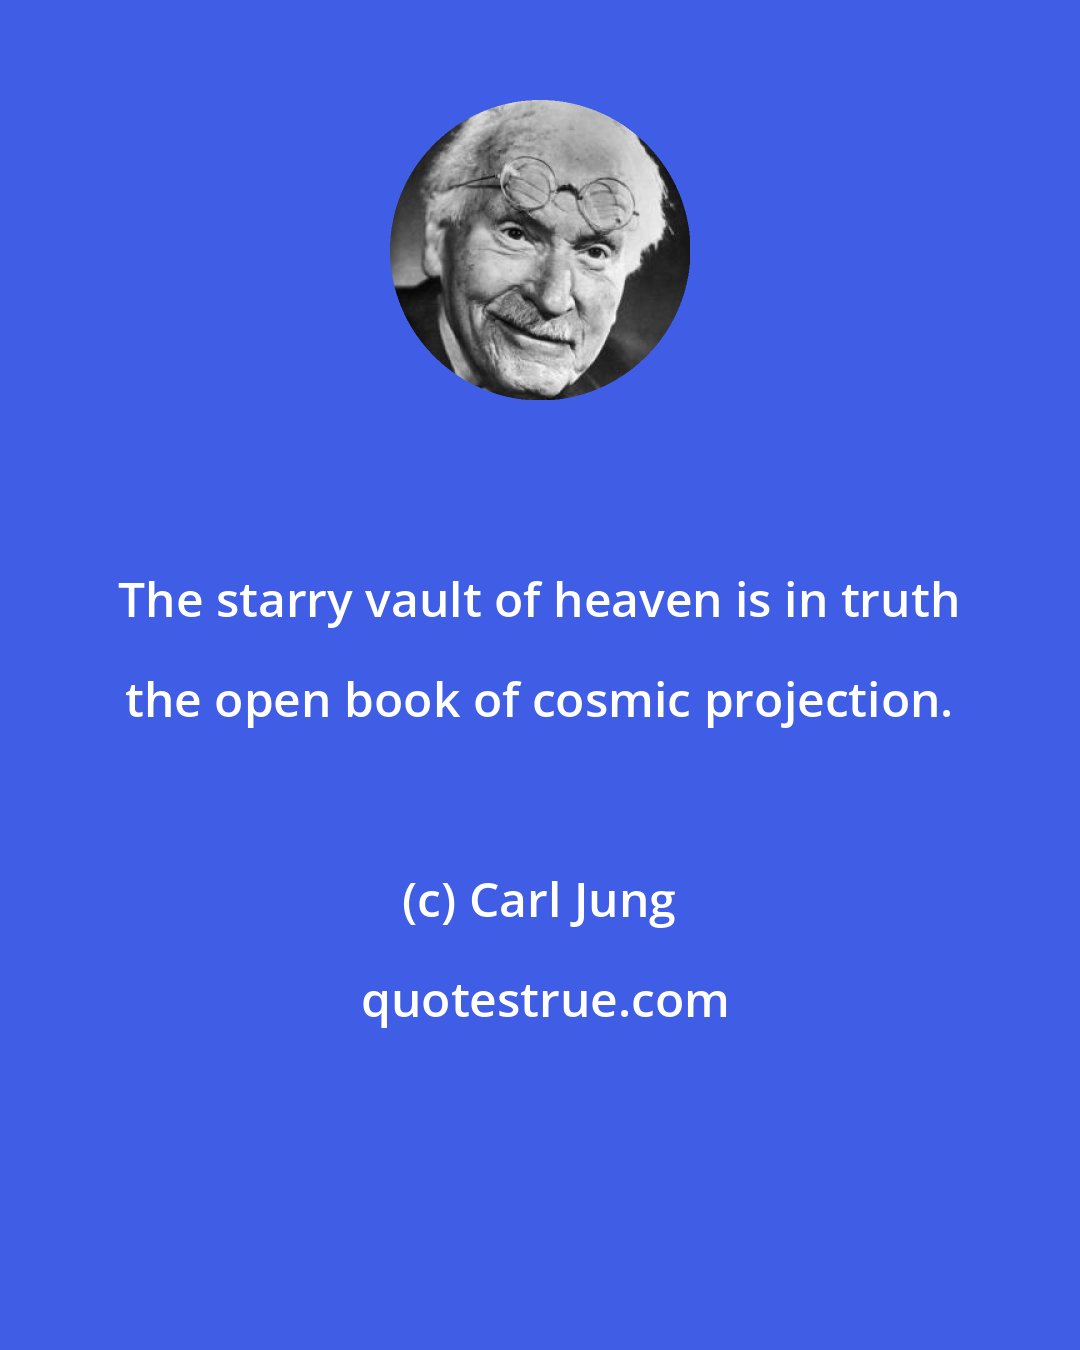 Carl Jung: The starry vault of heaven is in truth the open book of cosmic projection.